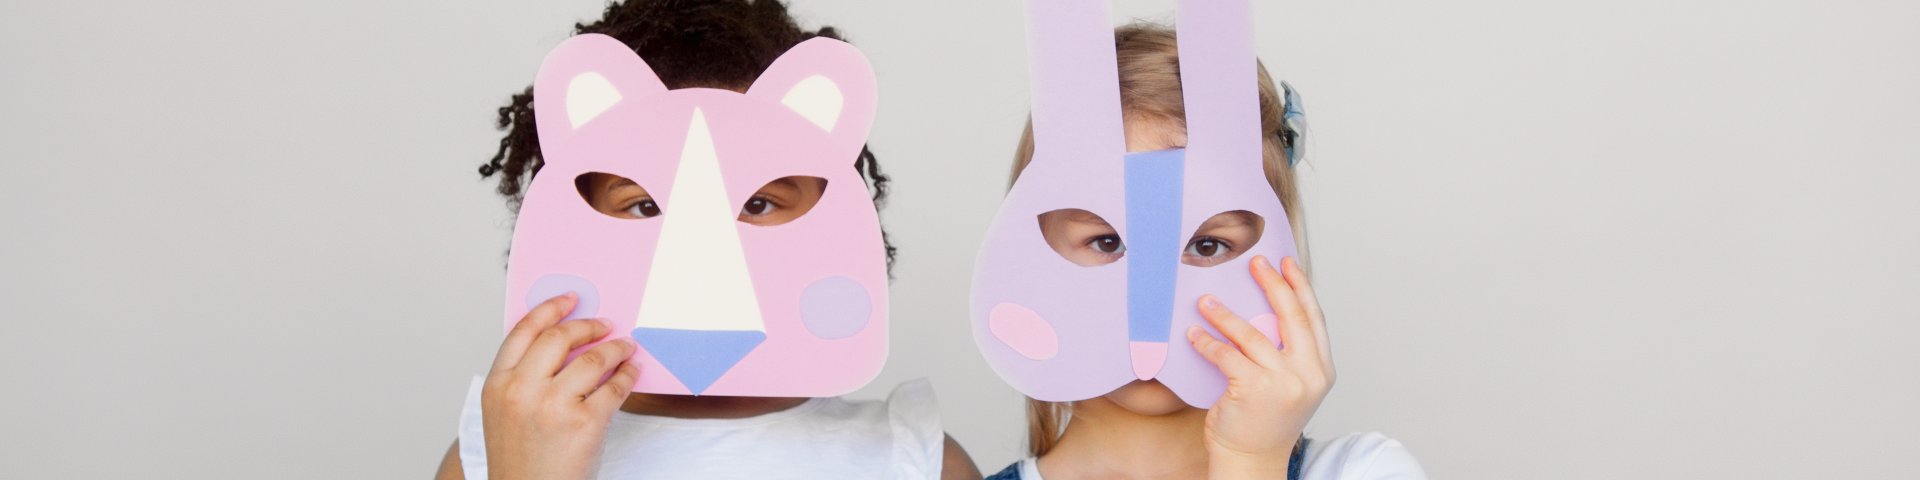 Two Kids Covering Their Faces With a Cutout Animal Mask